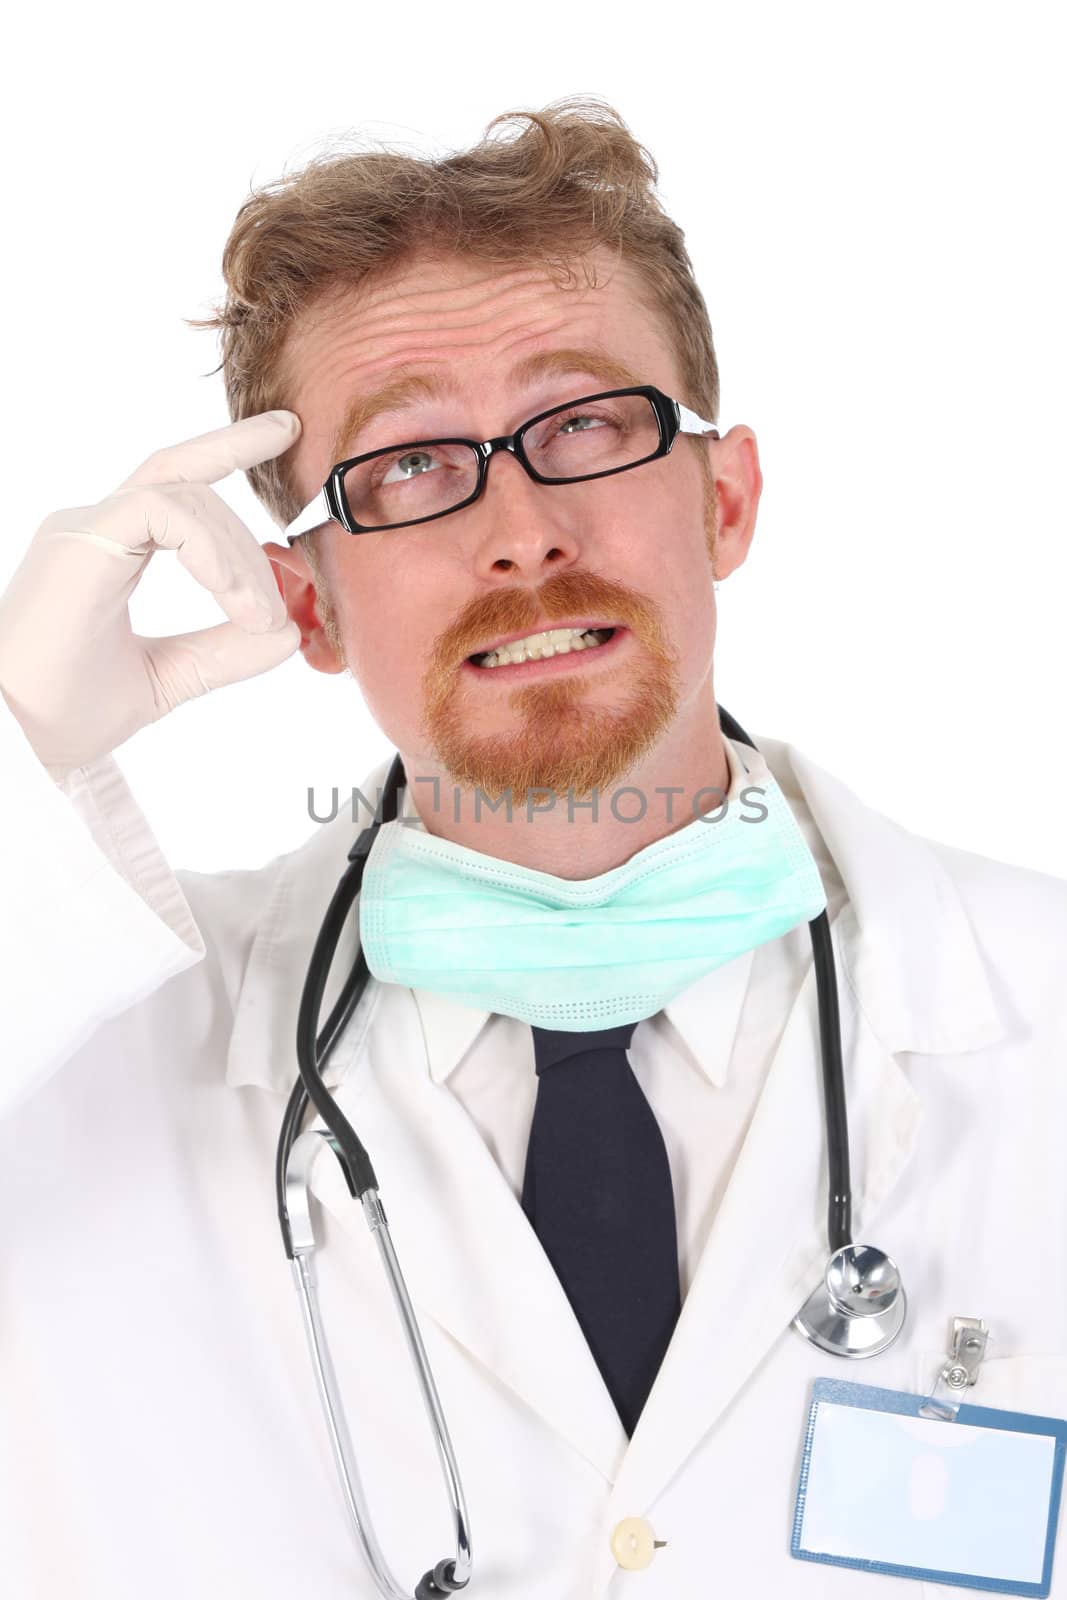 details thinking doctor with stethoscope on white background